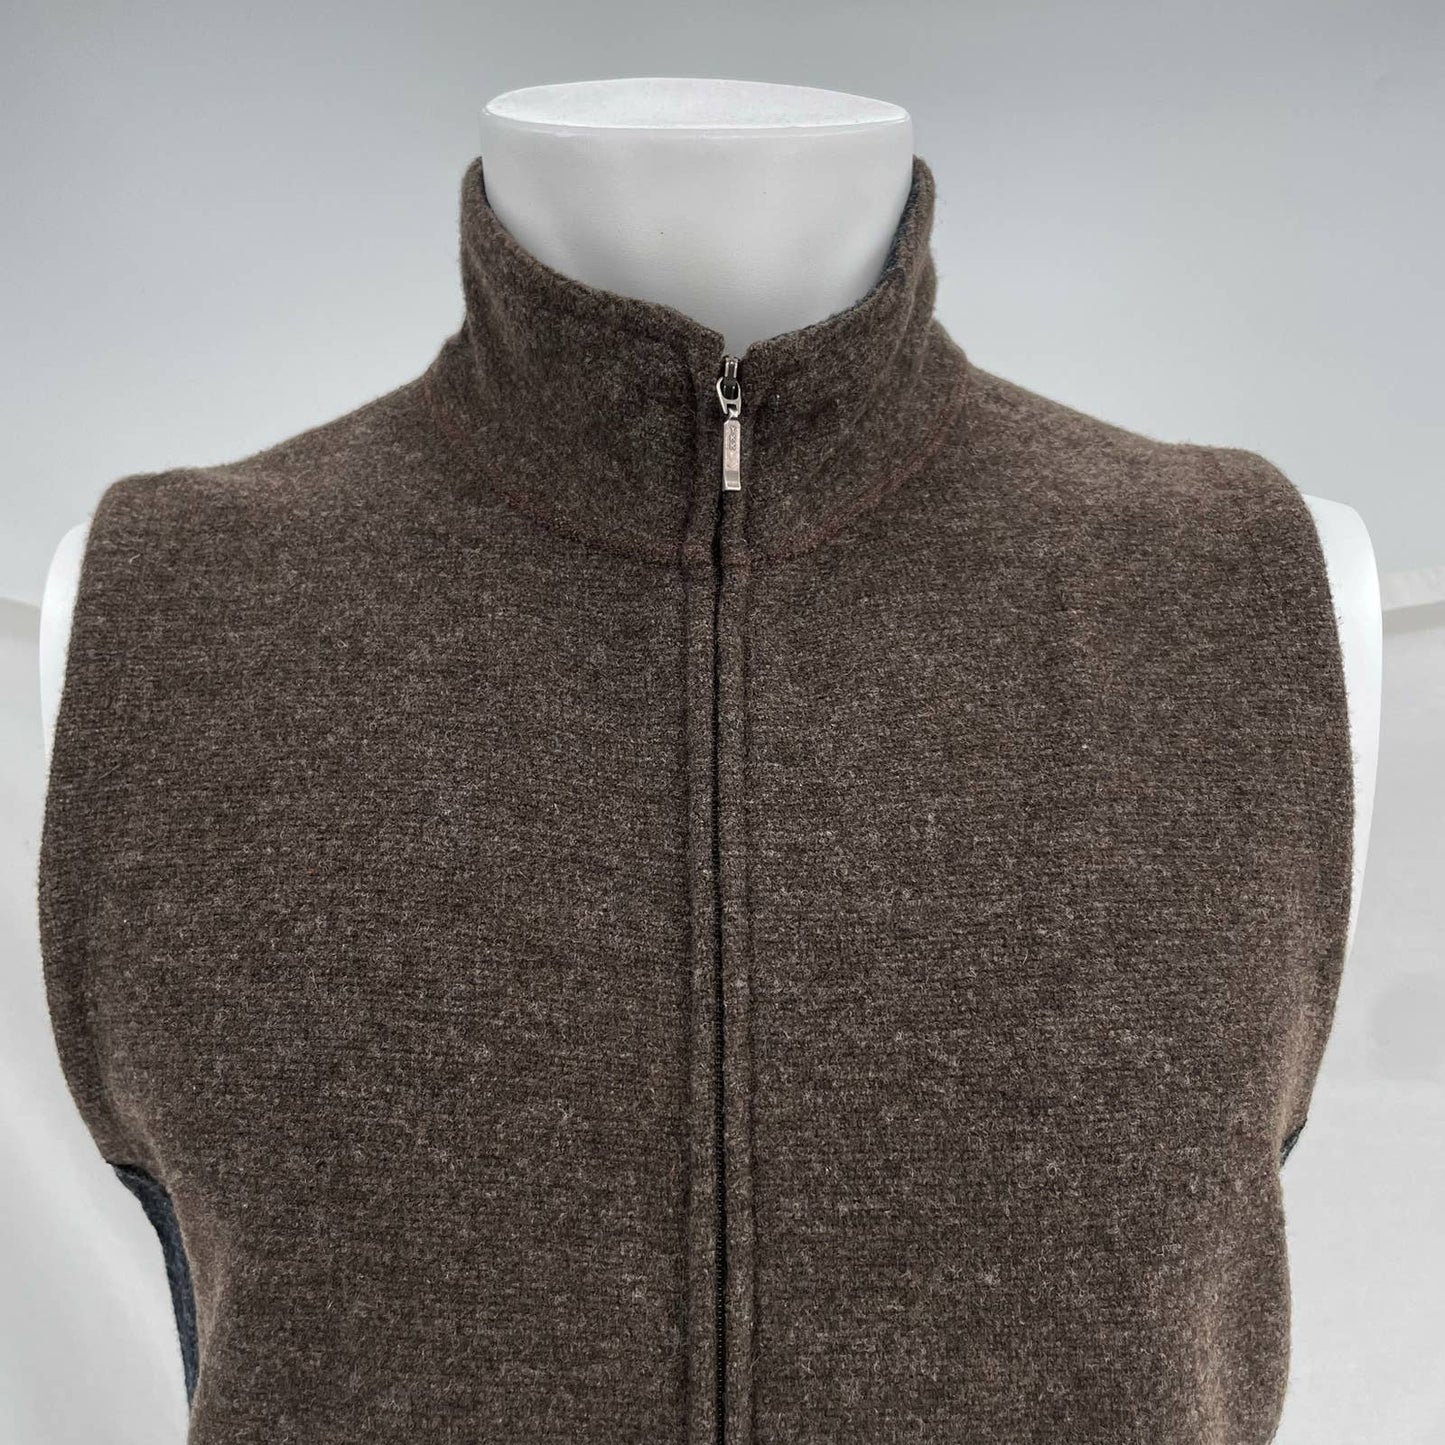 Ibex Merino Wool Full Zip Vest Brown Taupe Black Gray Pockets Outdoor Fit Size L